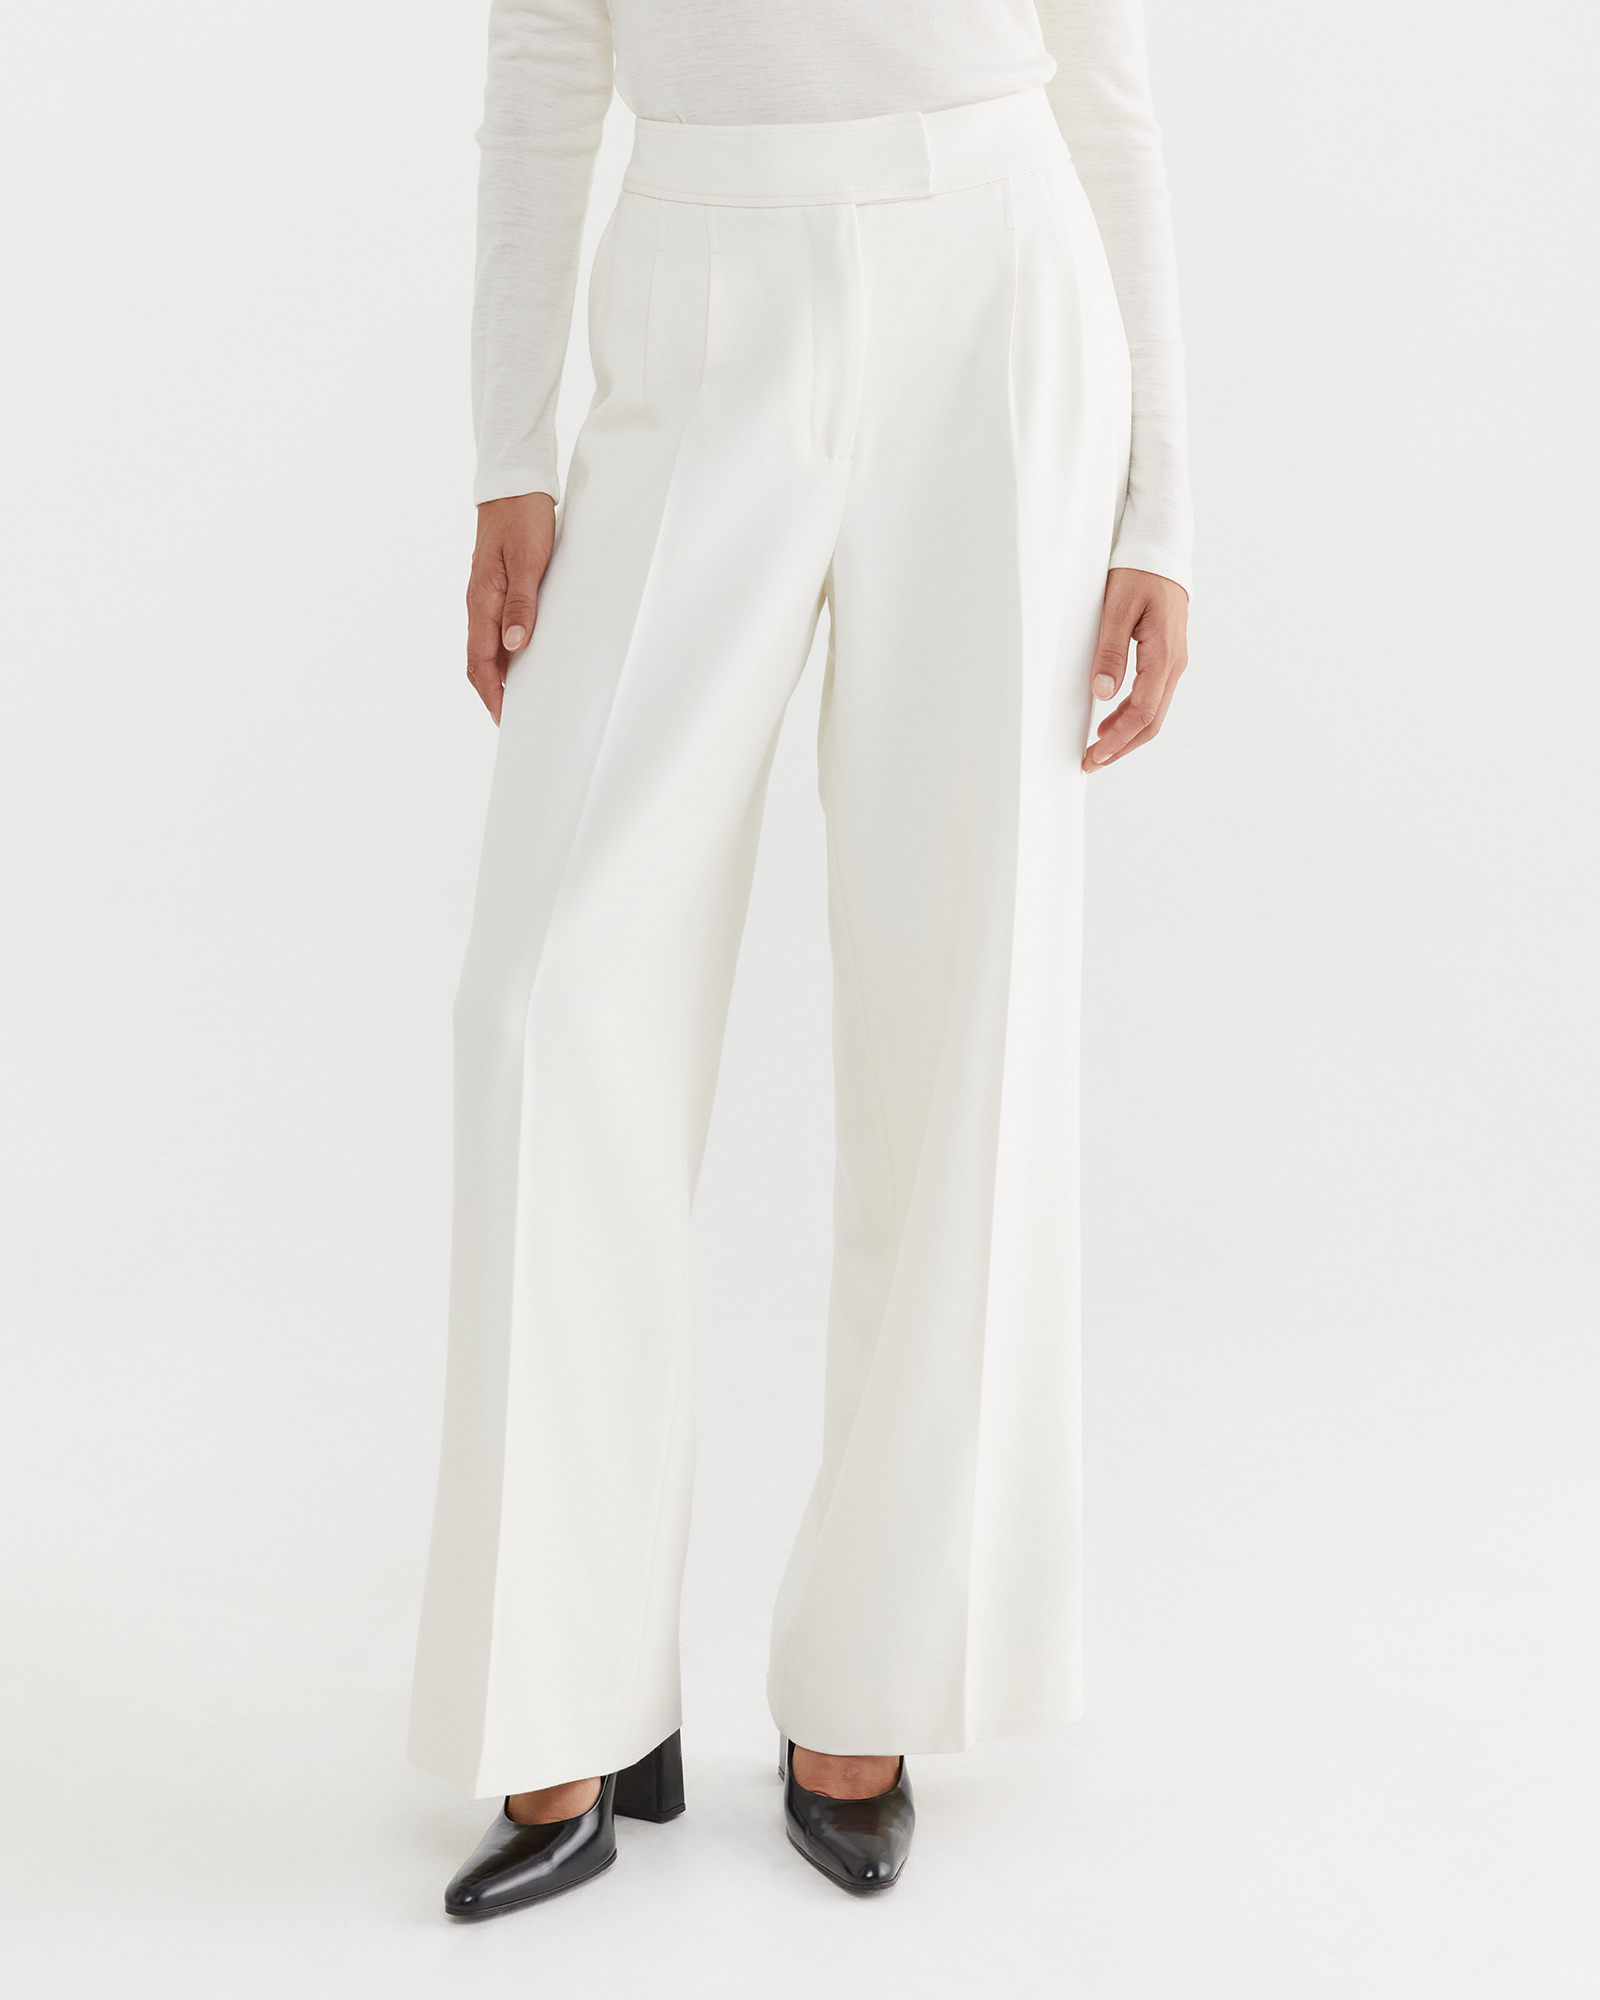 Politix Slim Stretch Marle Tailored Pant In Winter White  MYER